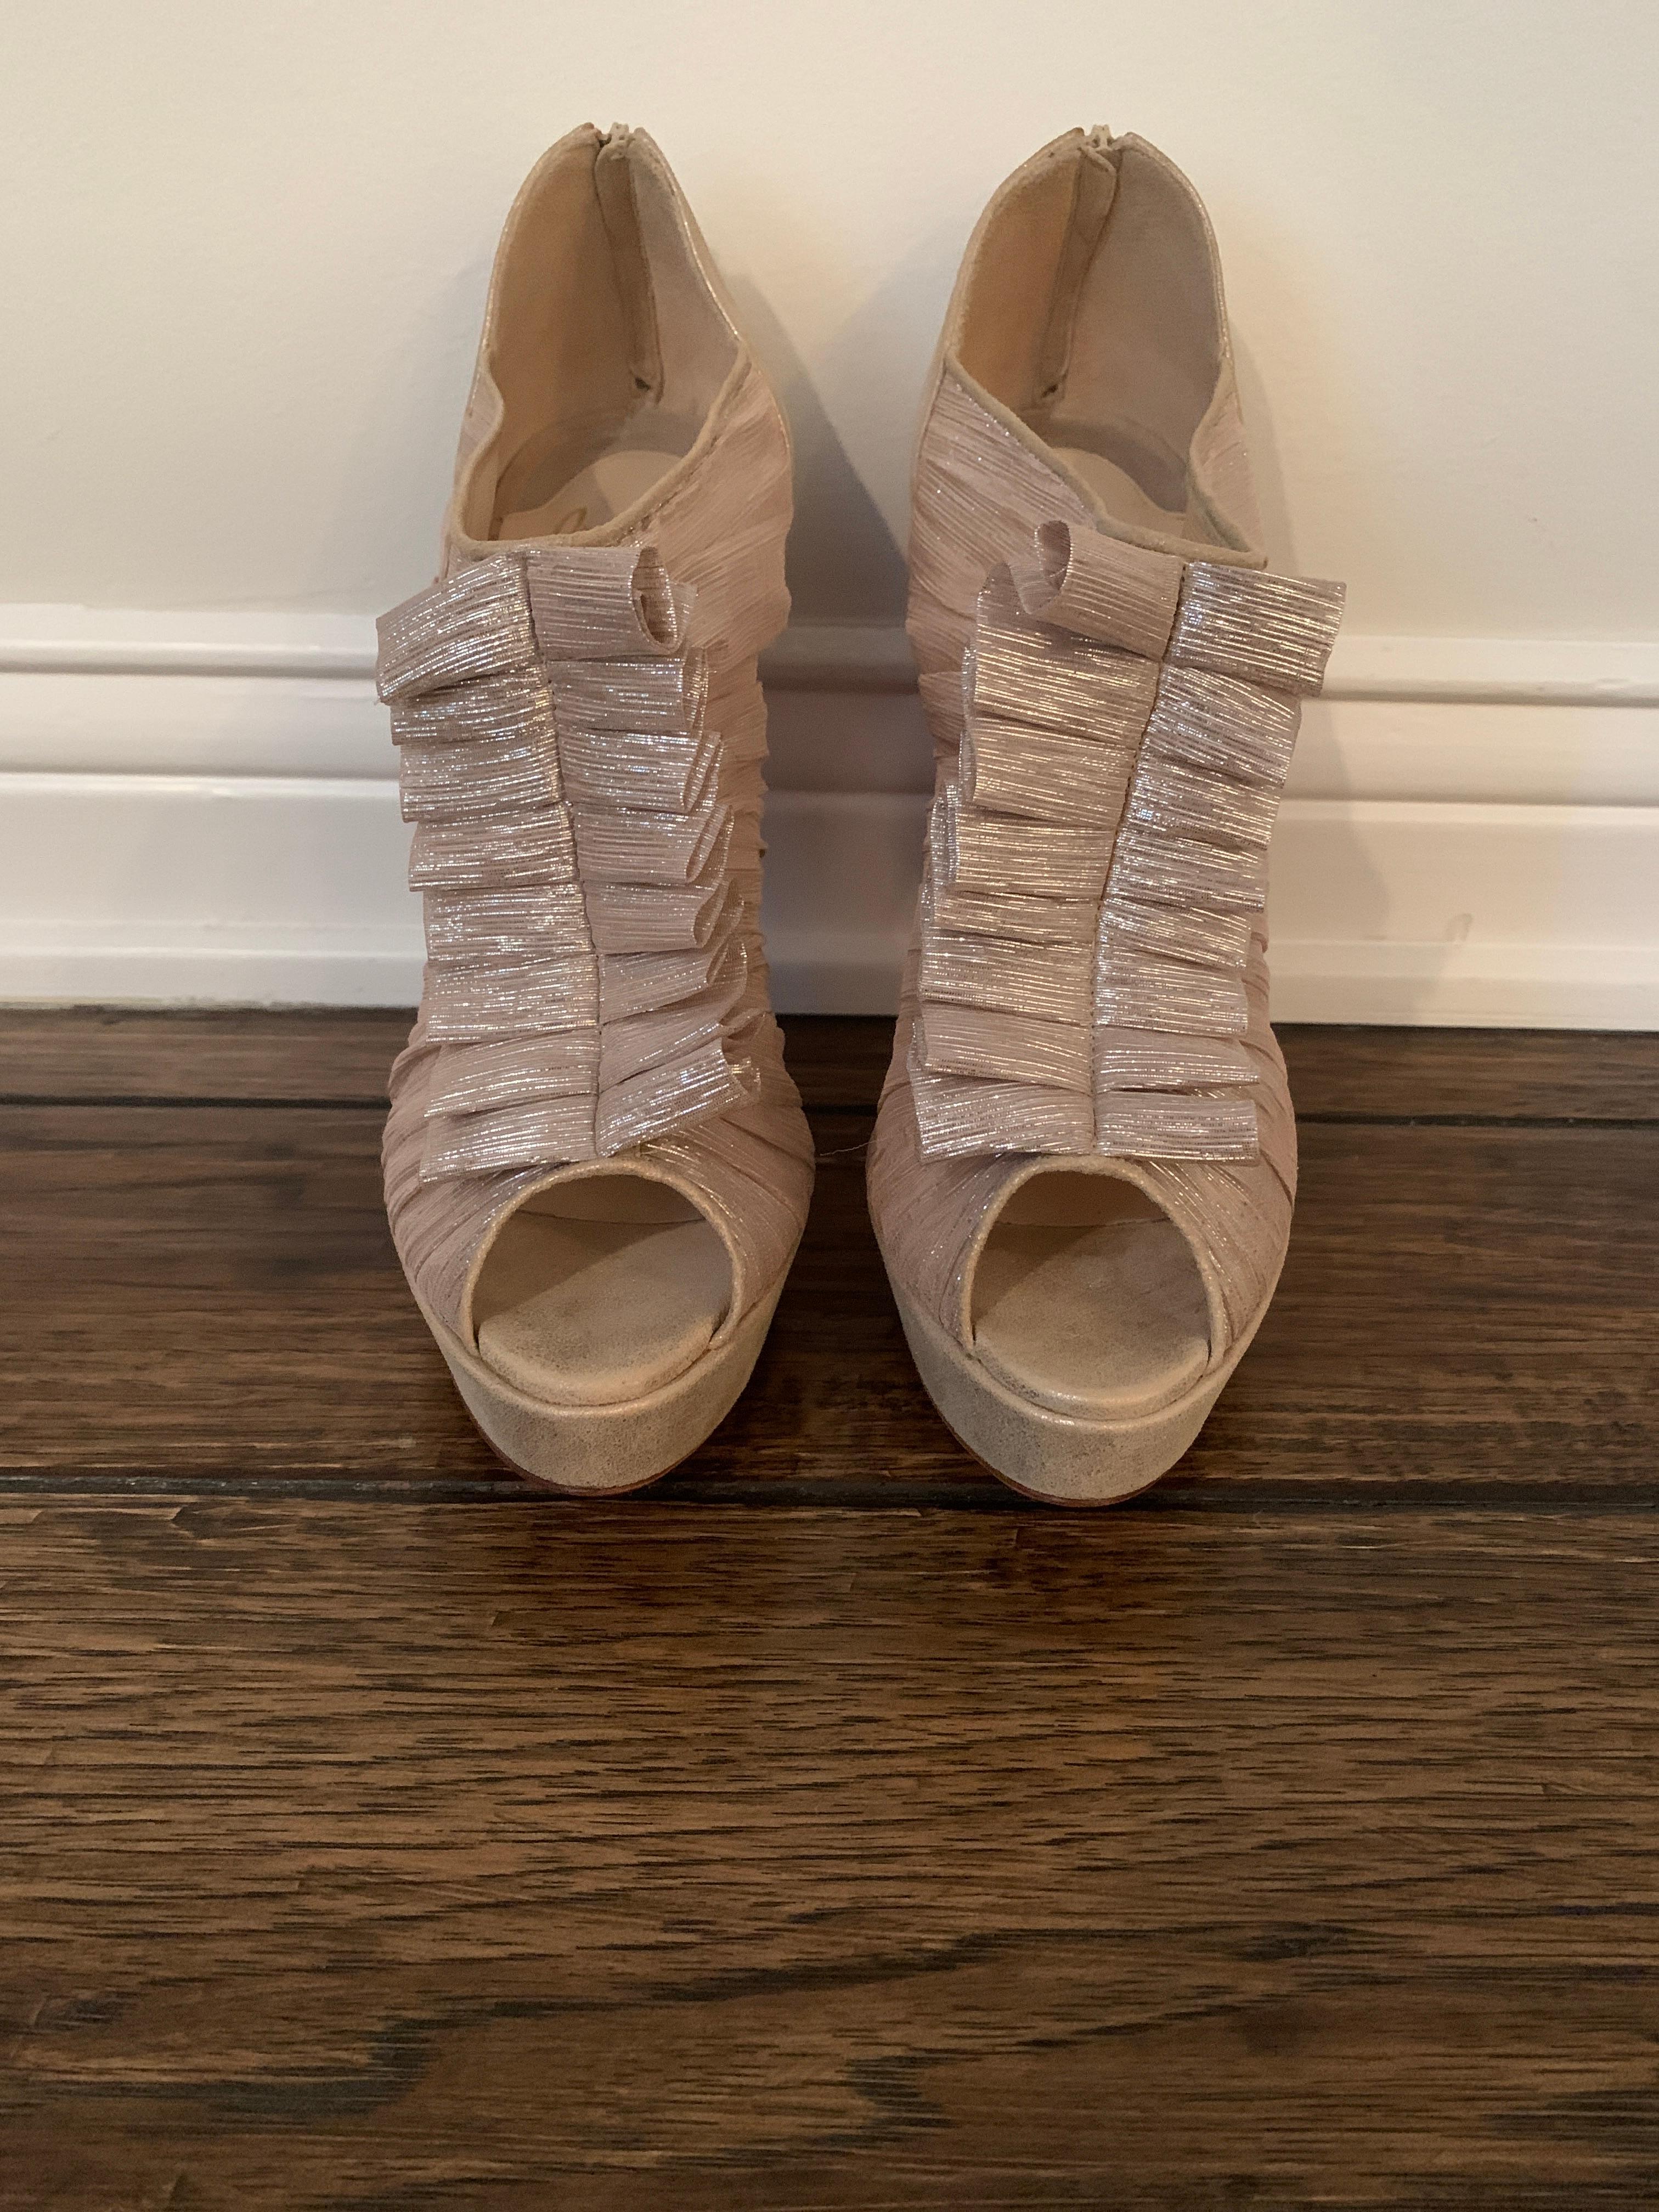 Christian Louboutin Gold, Silk, Ruffle Stiletto Heels
Never Been Worn.
No Signs of wear on the soles
Heel Height 4.75inches 
Size 40 
Retail $1295
